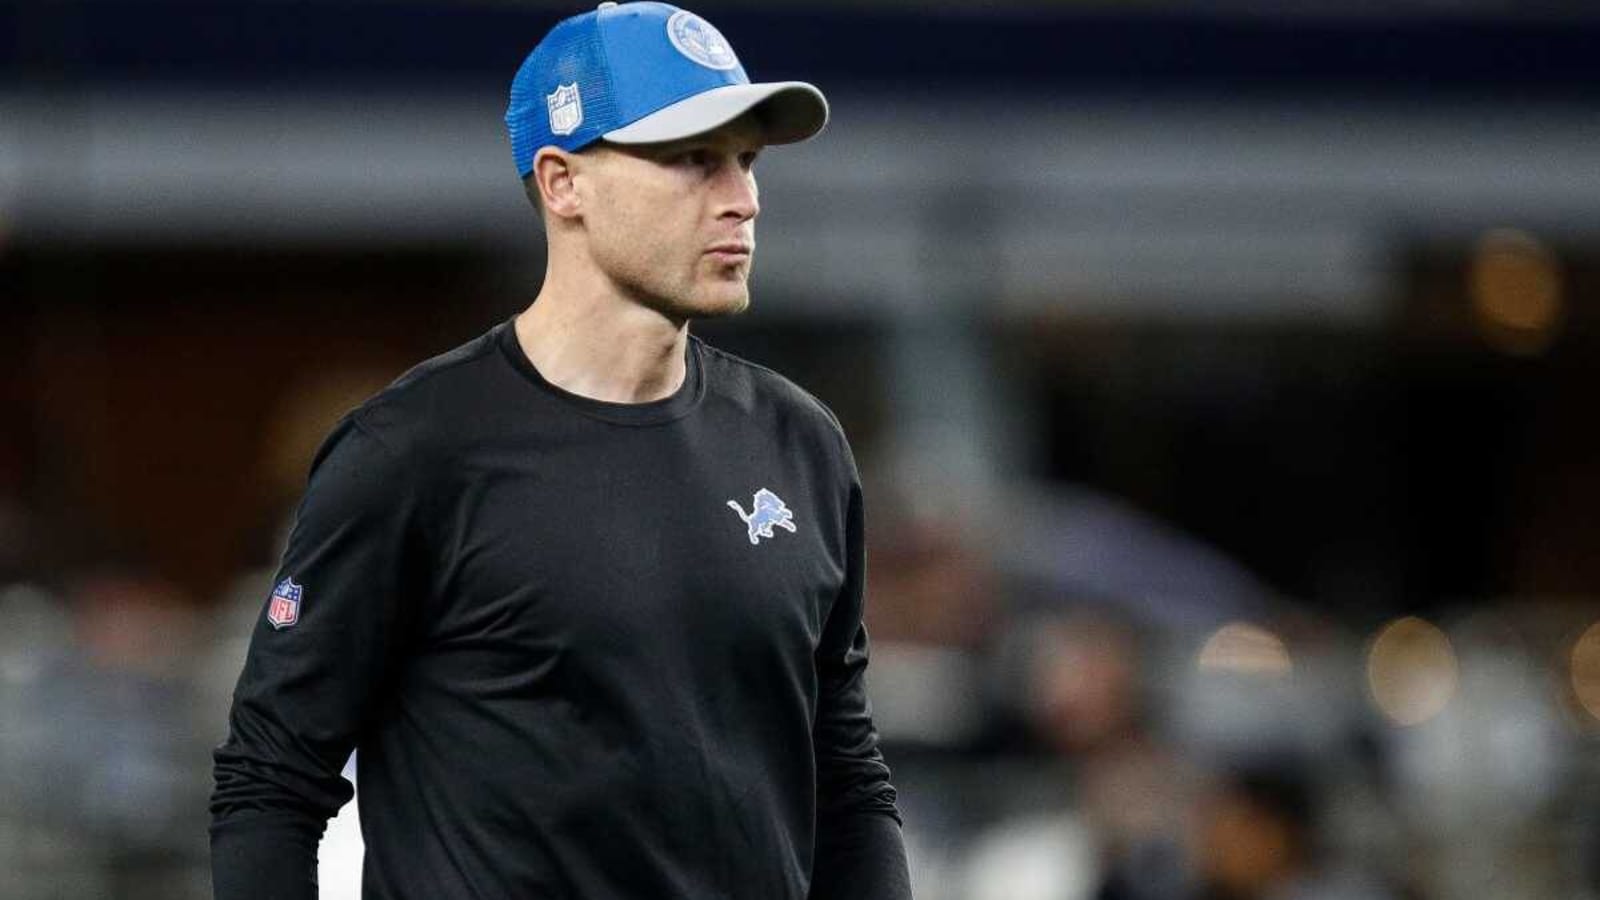 &#39;Diss Record is Coming!&#39; Eminem Threatens Lions&#39; Johnson Not to Leave for Commanders